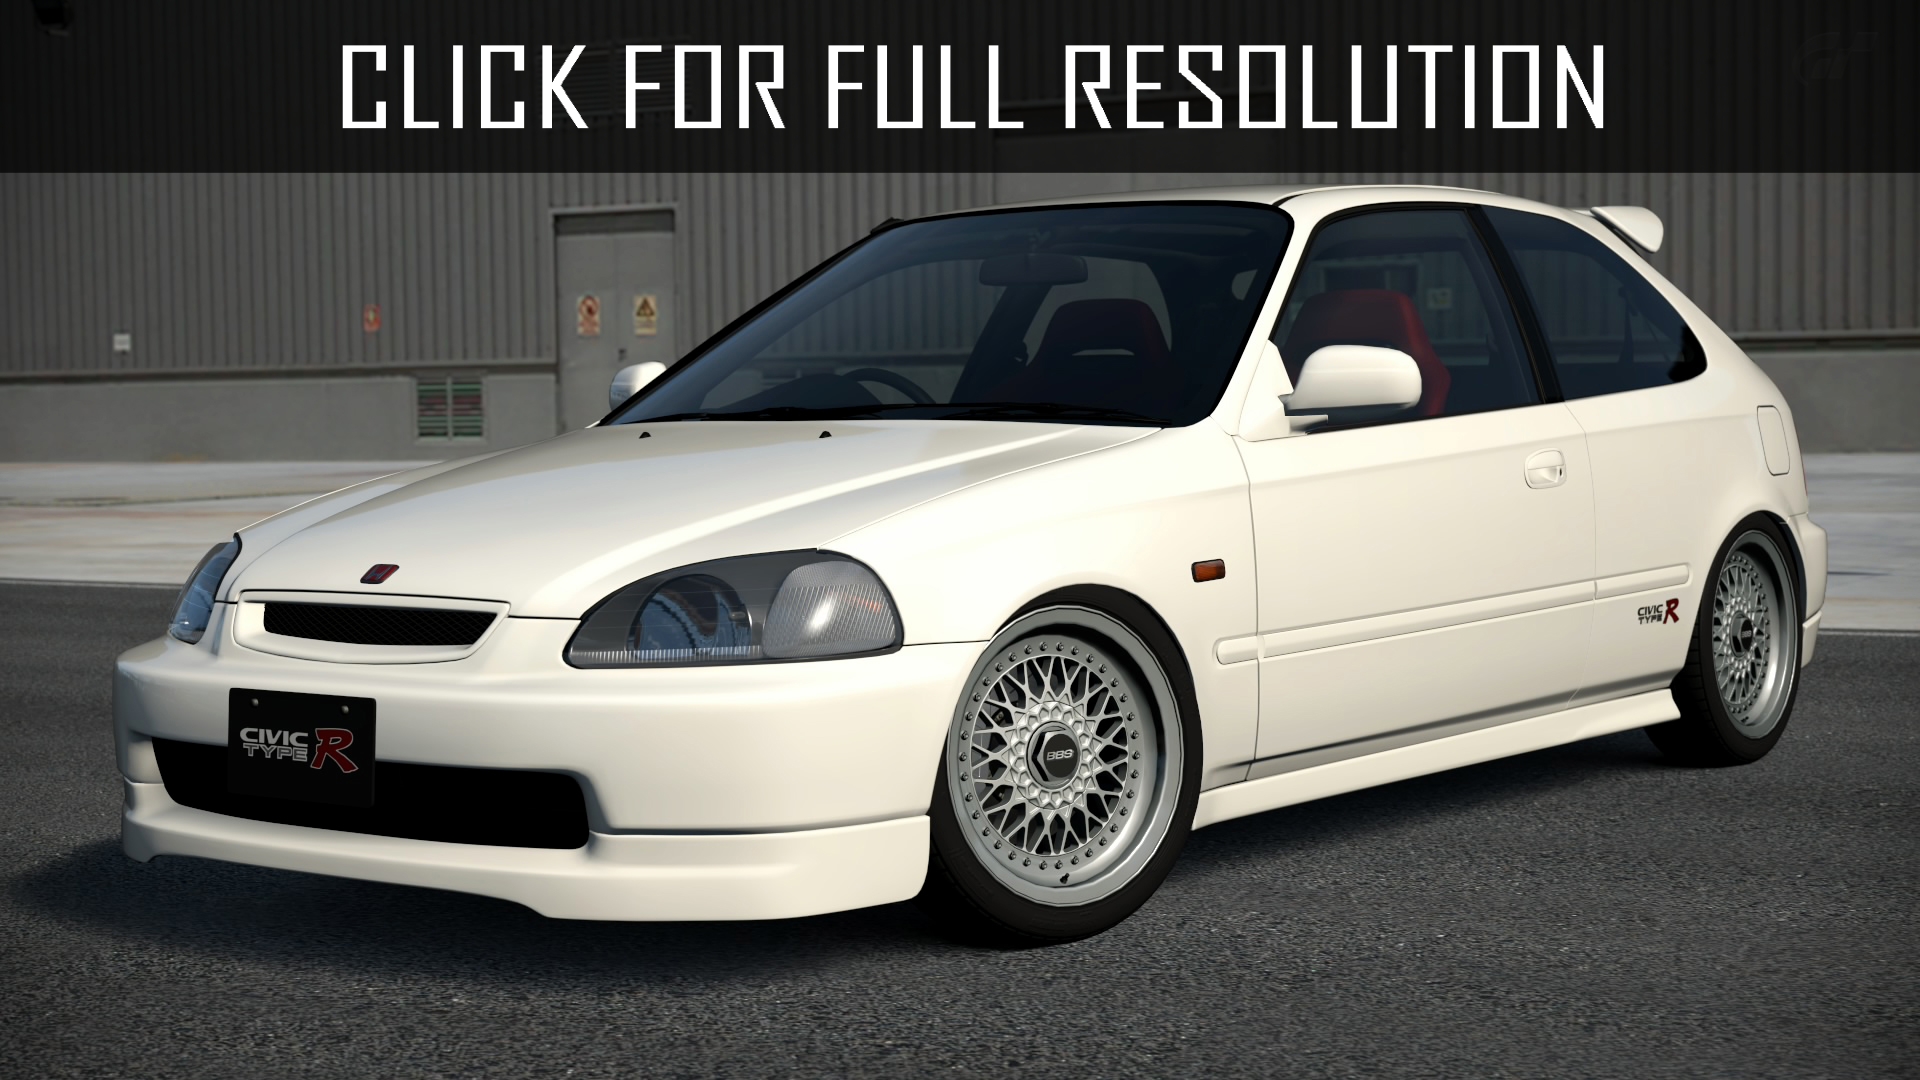 1998 Honda Civic Type R - news, reviews, msrp, ratings with amazing images